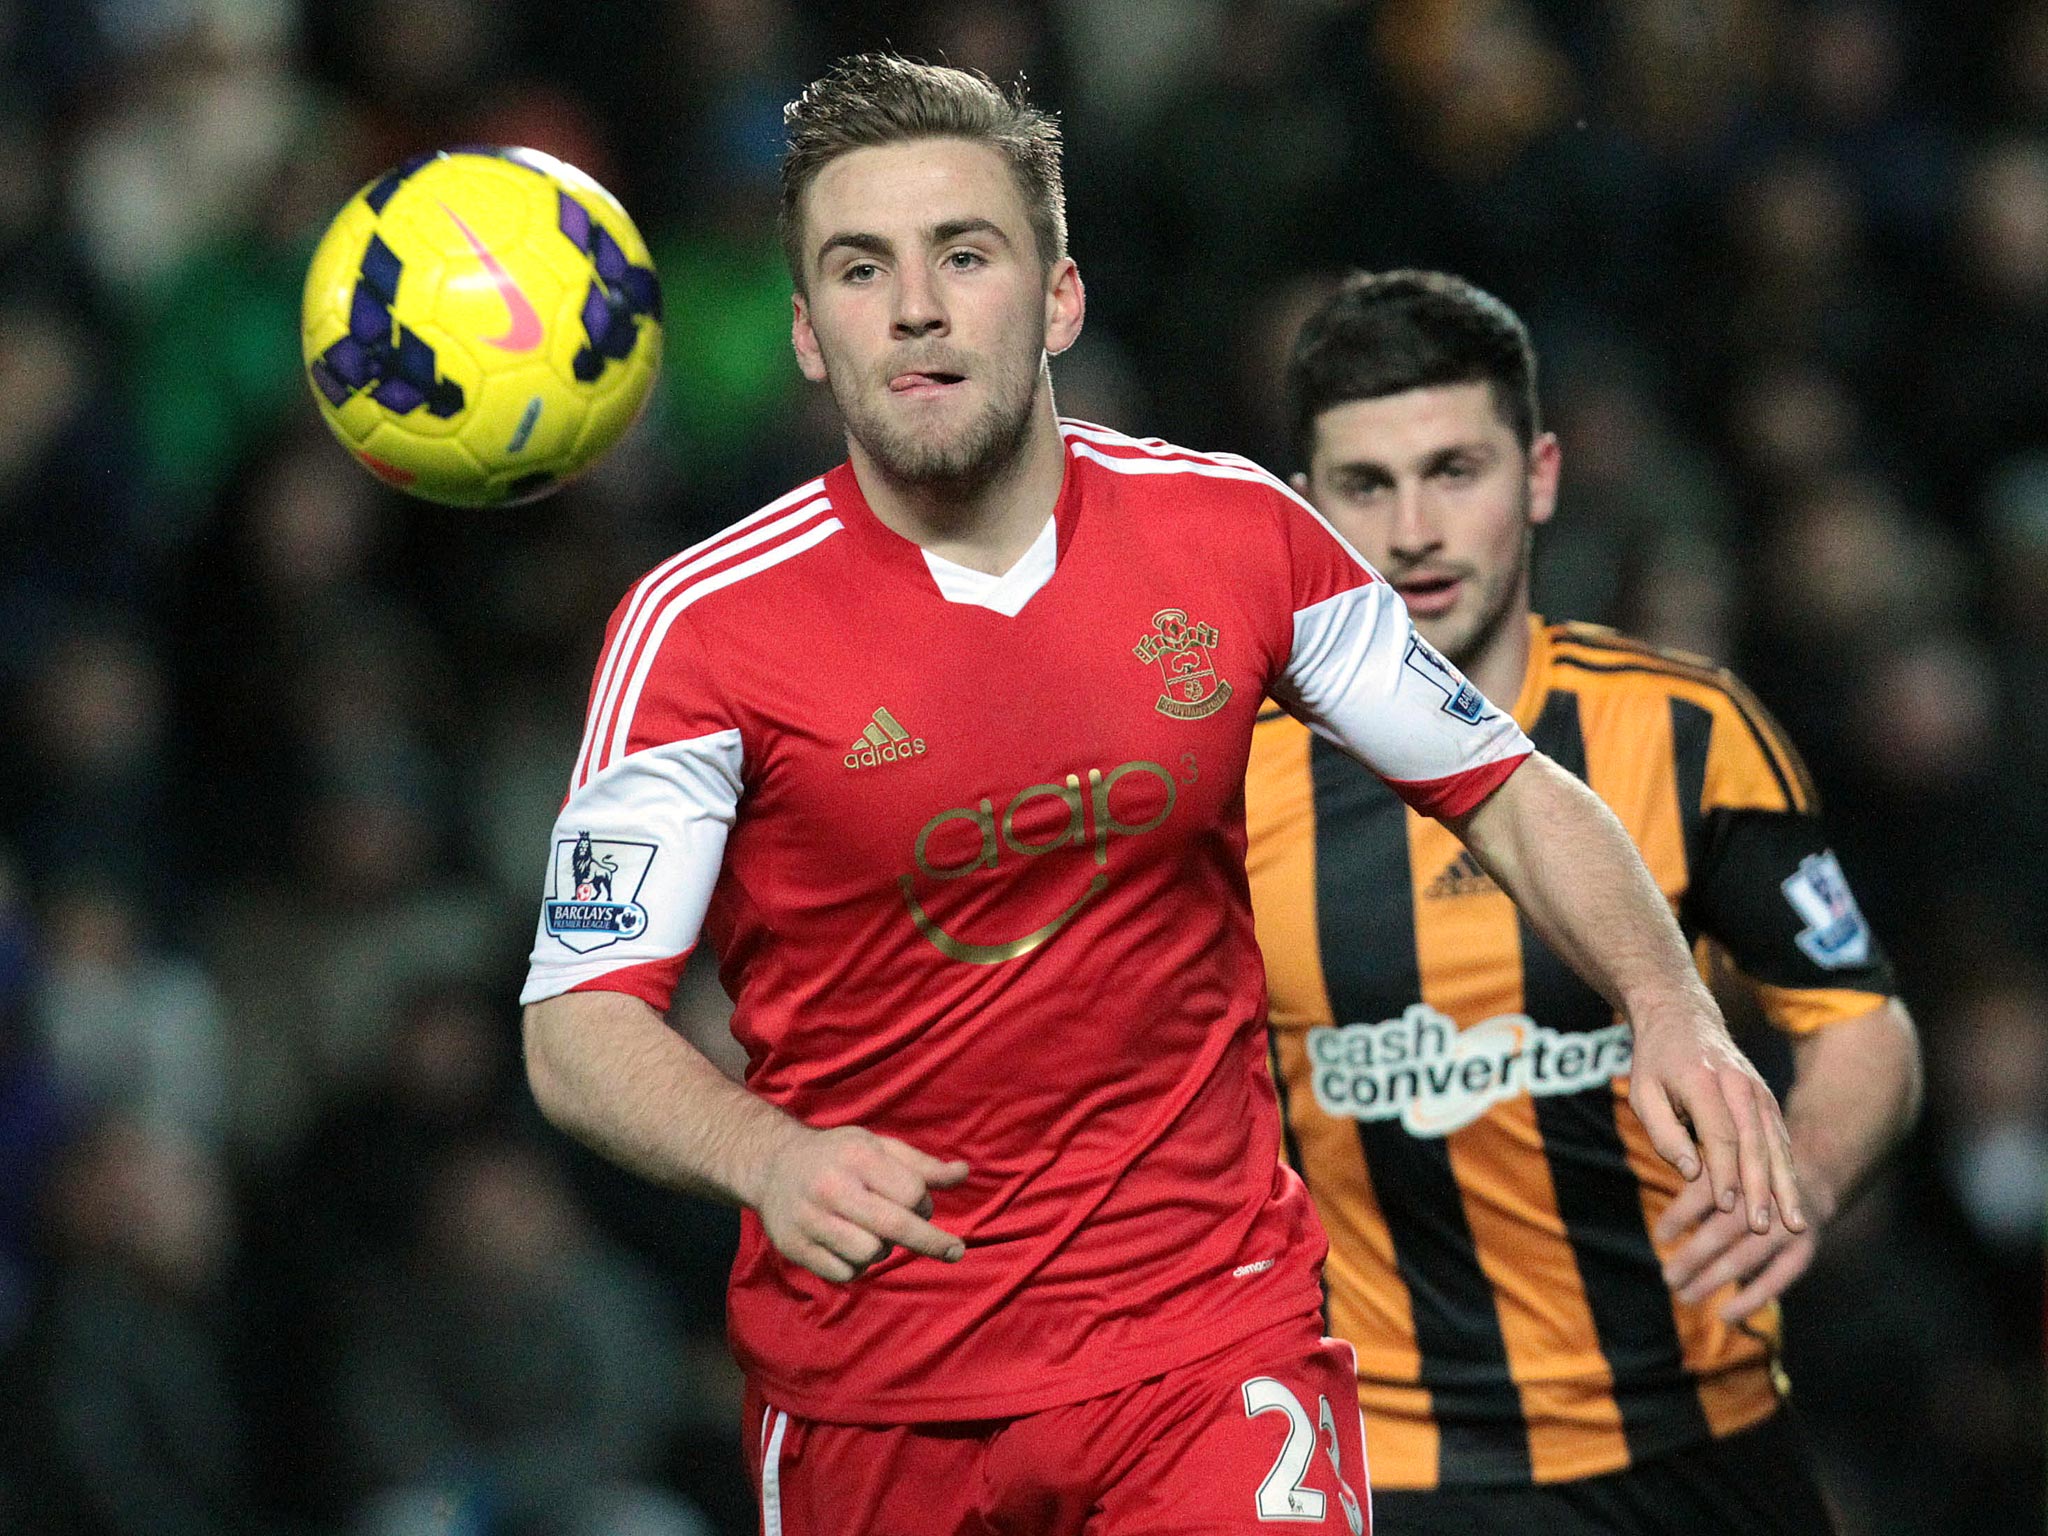 Southampton defender Luke Shaw could be given his first England cap in Wednesday's clash with Denmark